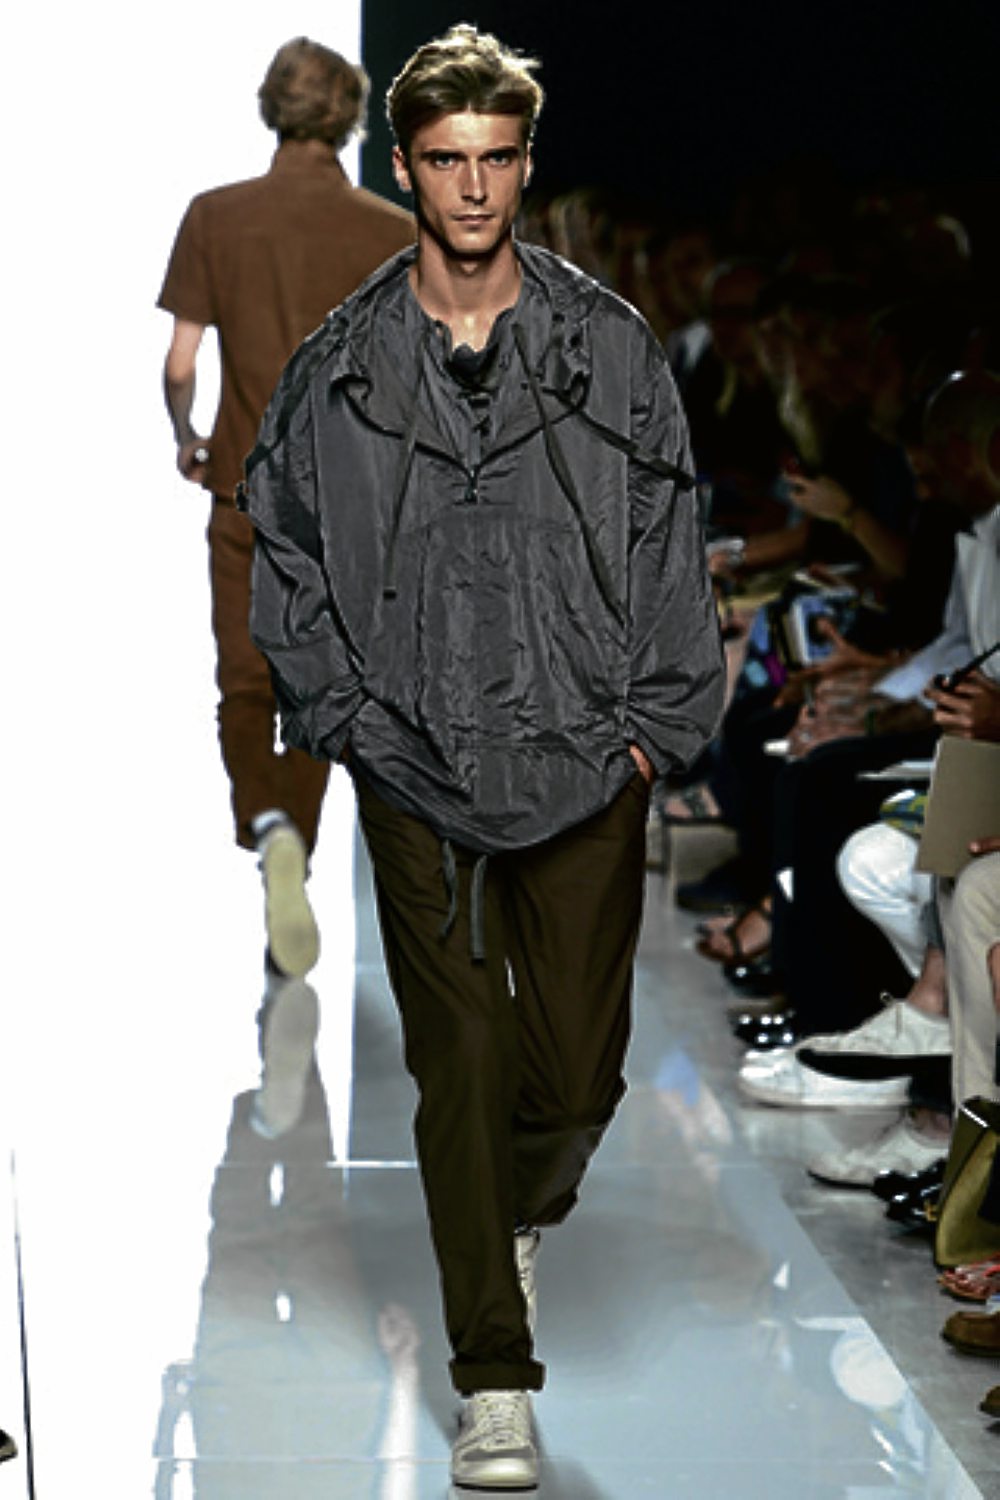 Traditional men’s wear gets experimental updating | Lifestyle.INQ